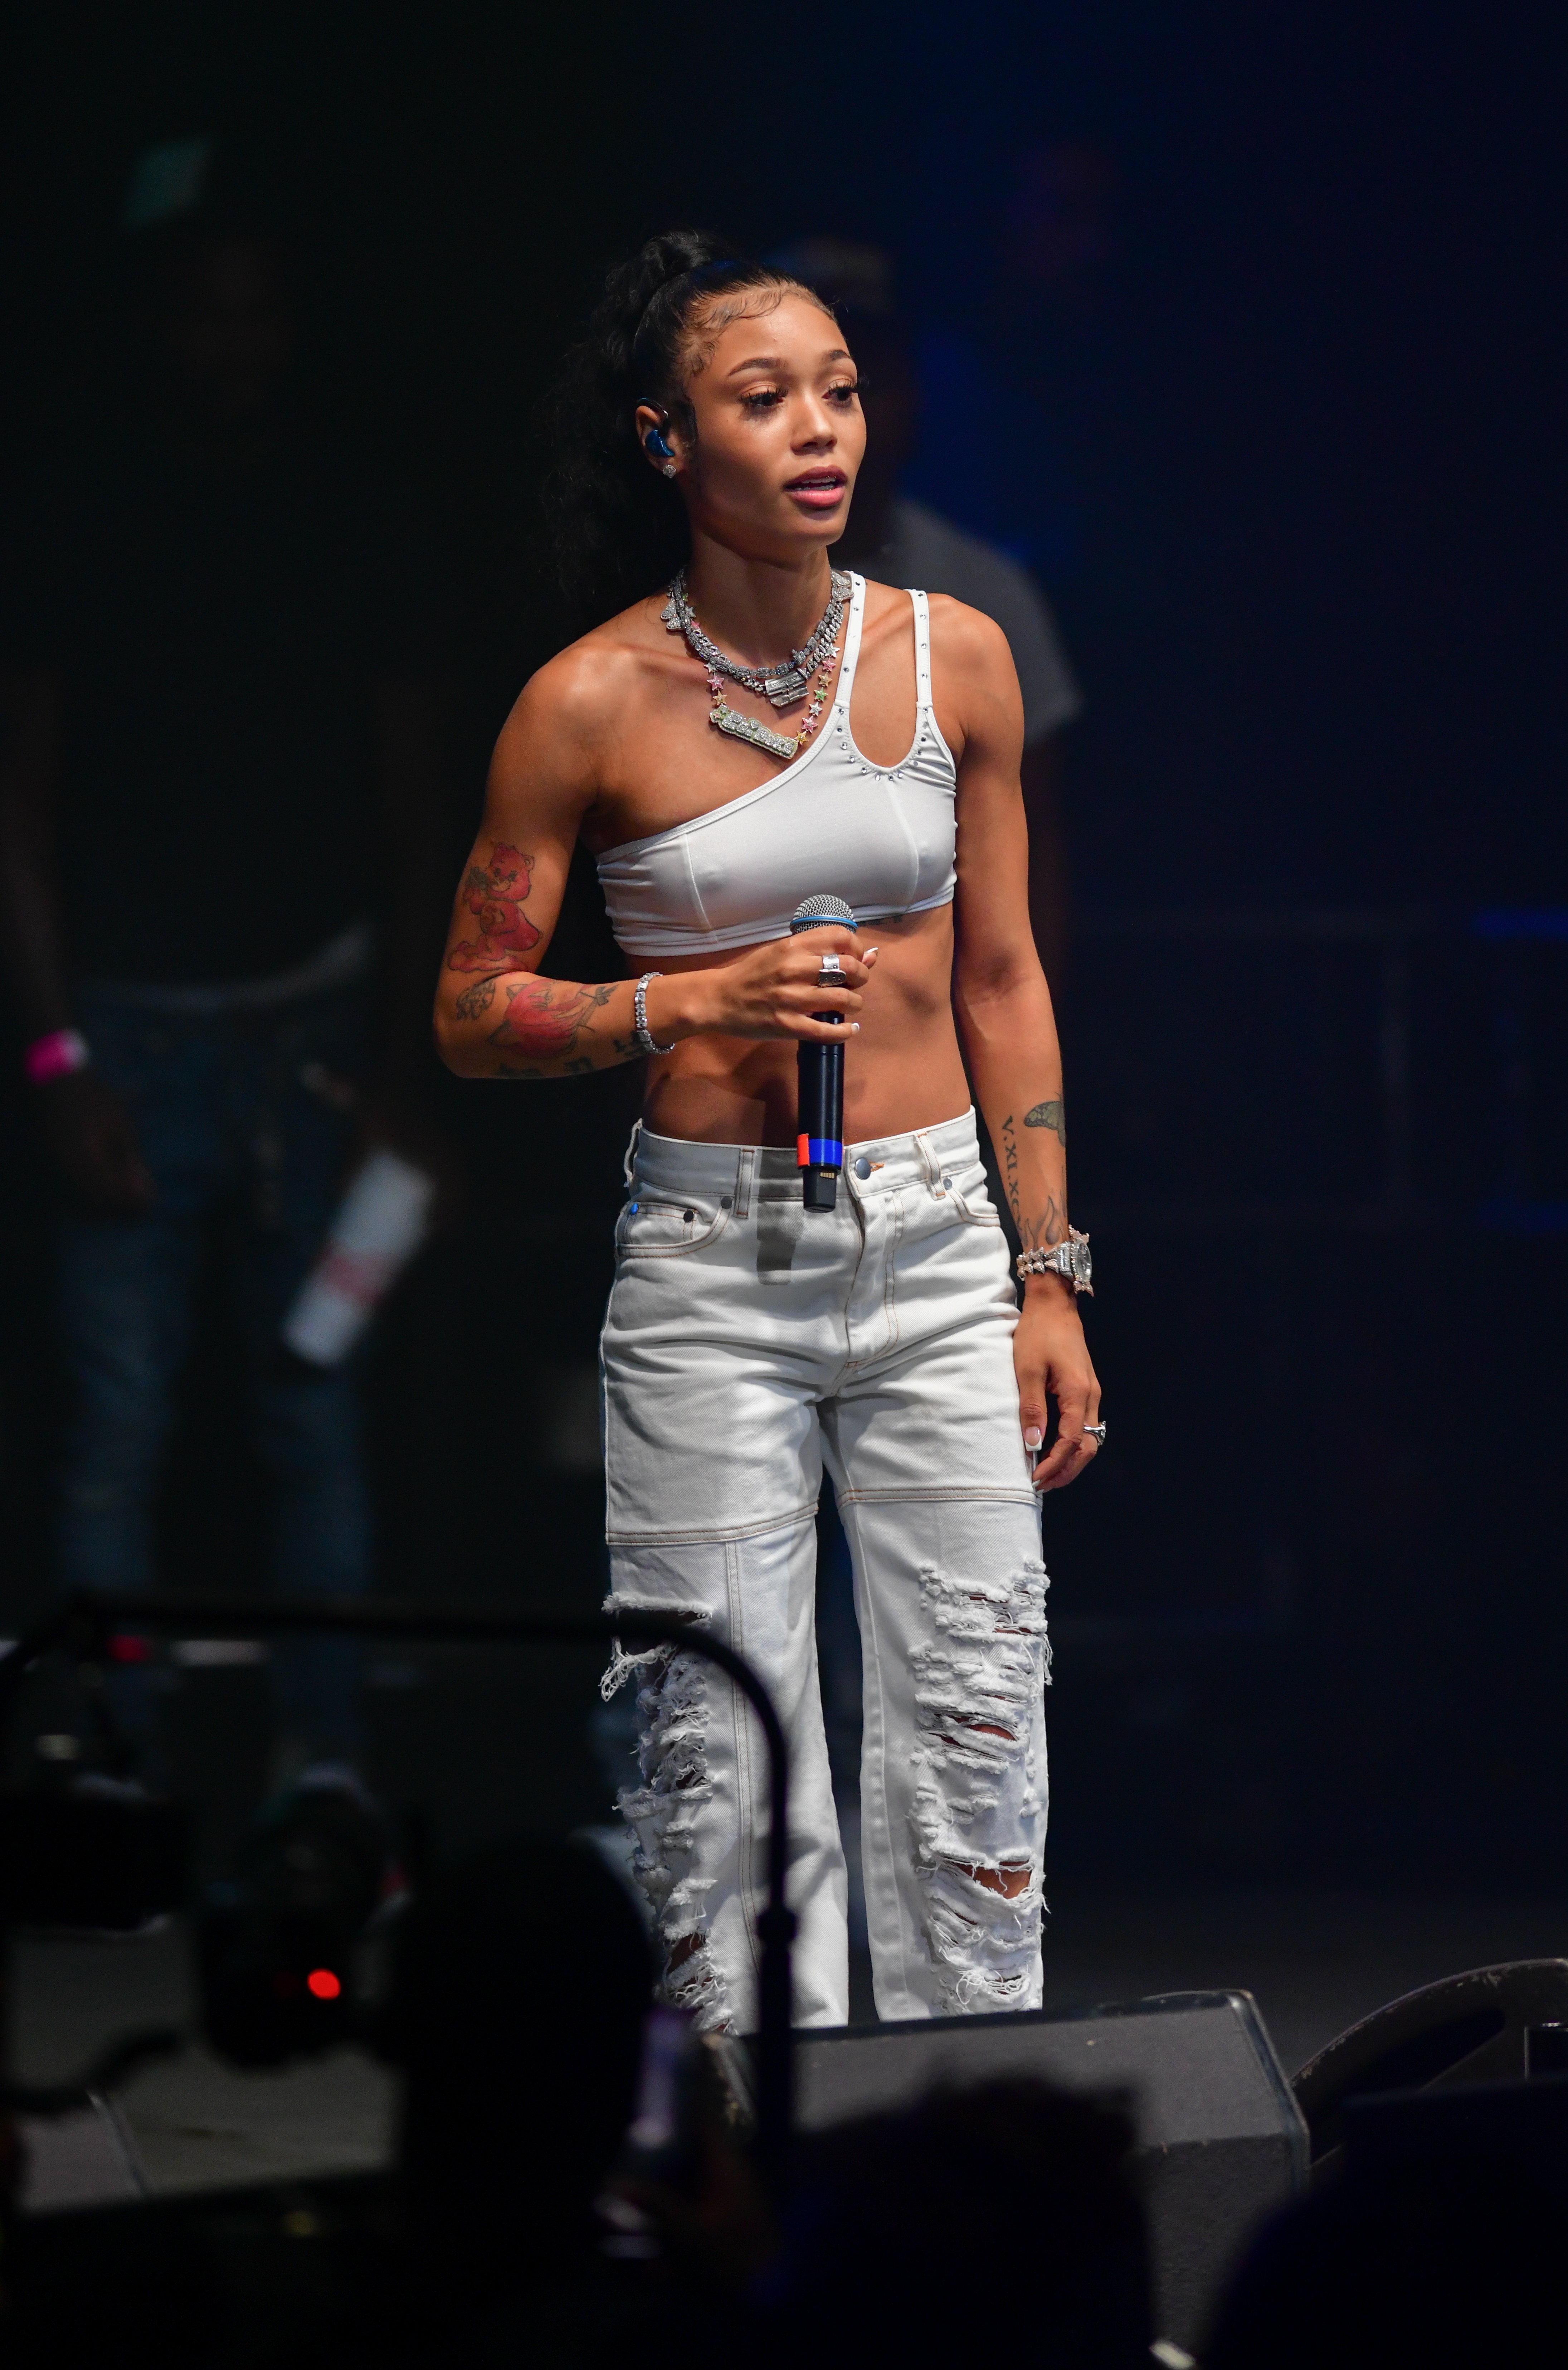 Coi Leray performs at Lil Baby & Friends Father's Day weekend Concert in 2021, in Biloxi, Mississippi. | Source: Getty Images